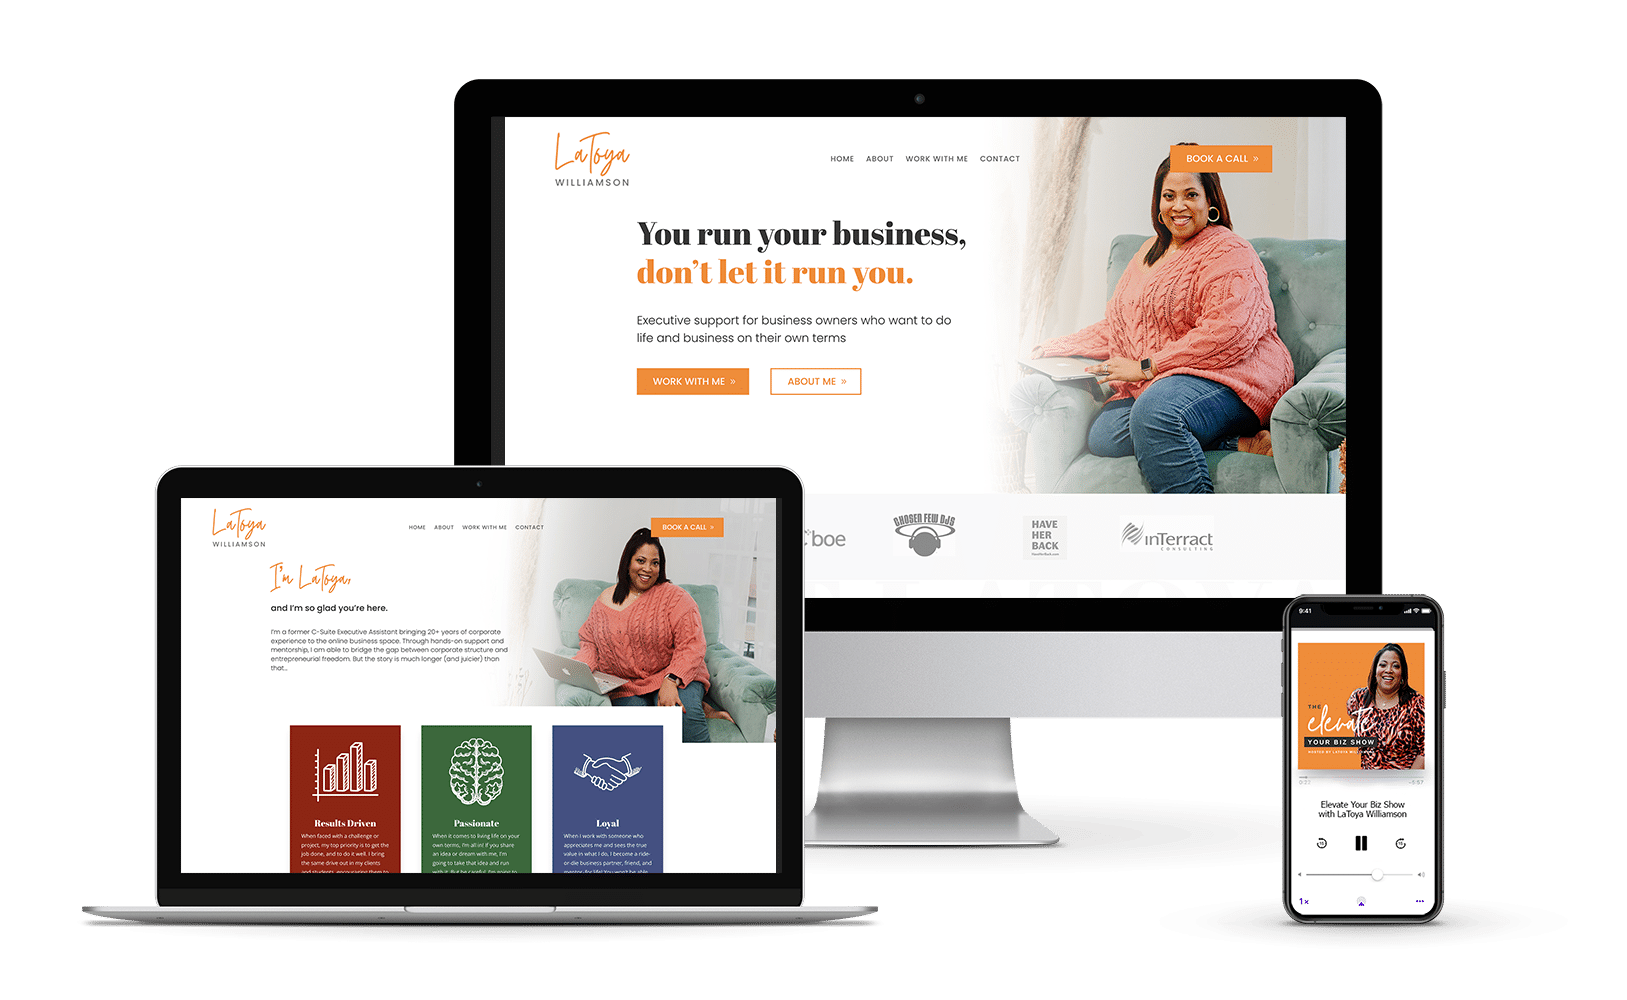 website design for online business coaches - vip website in a day